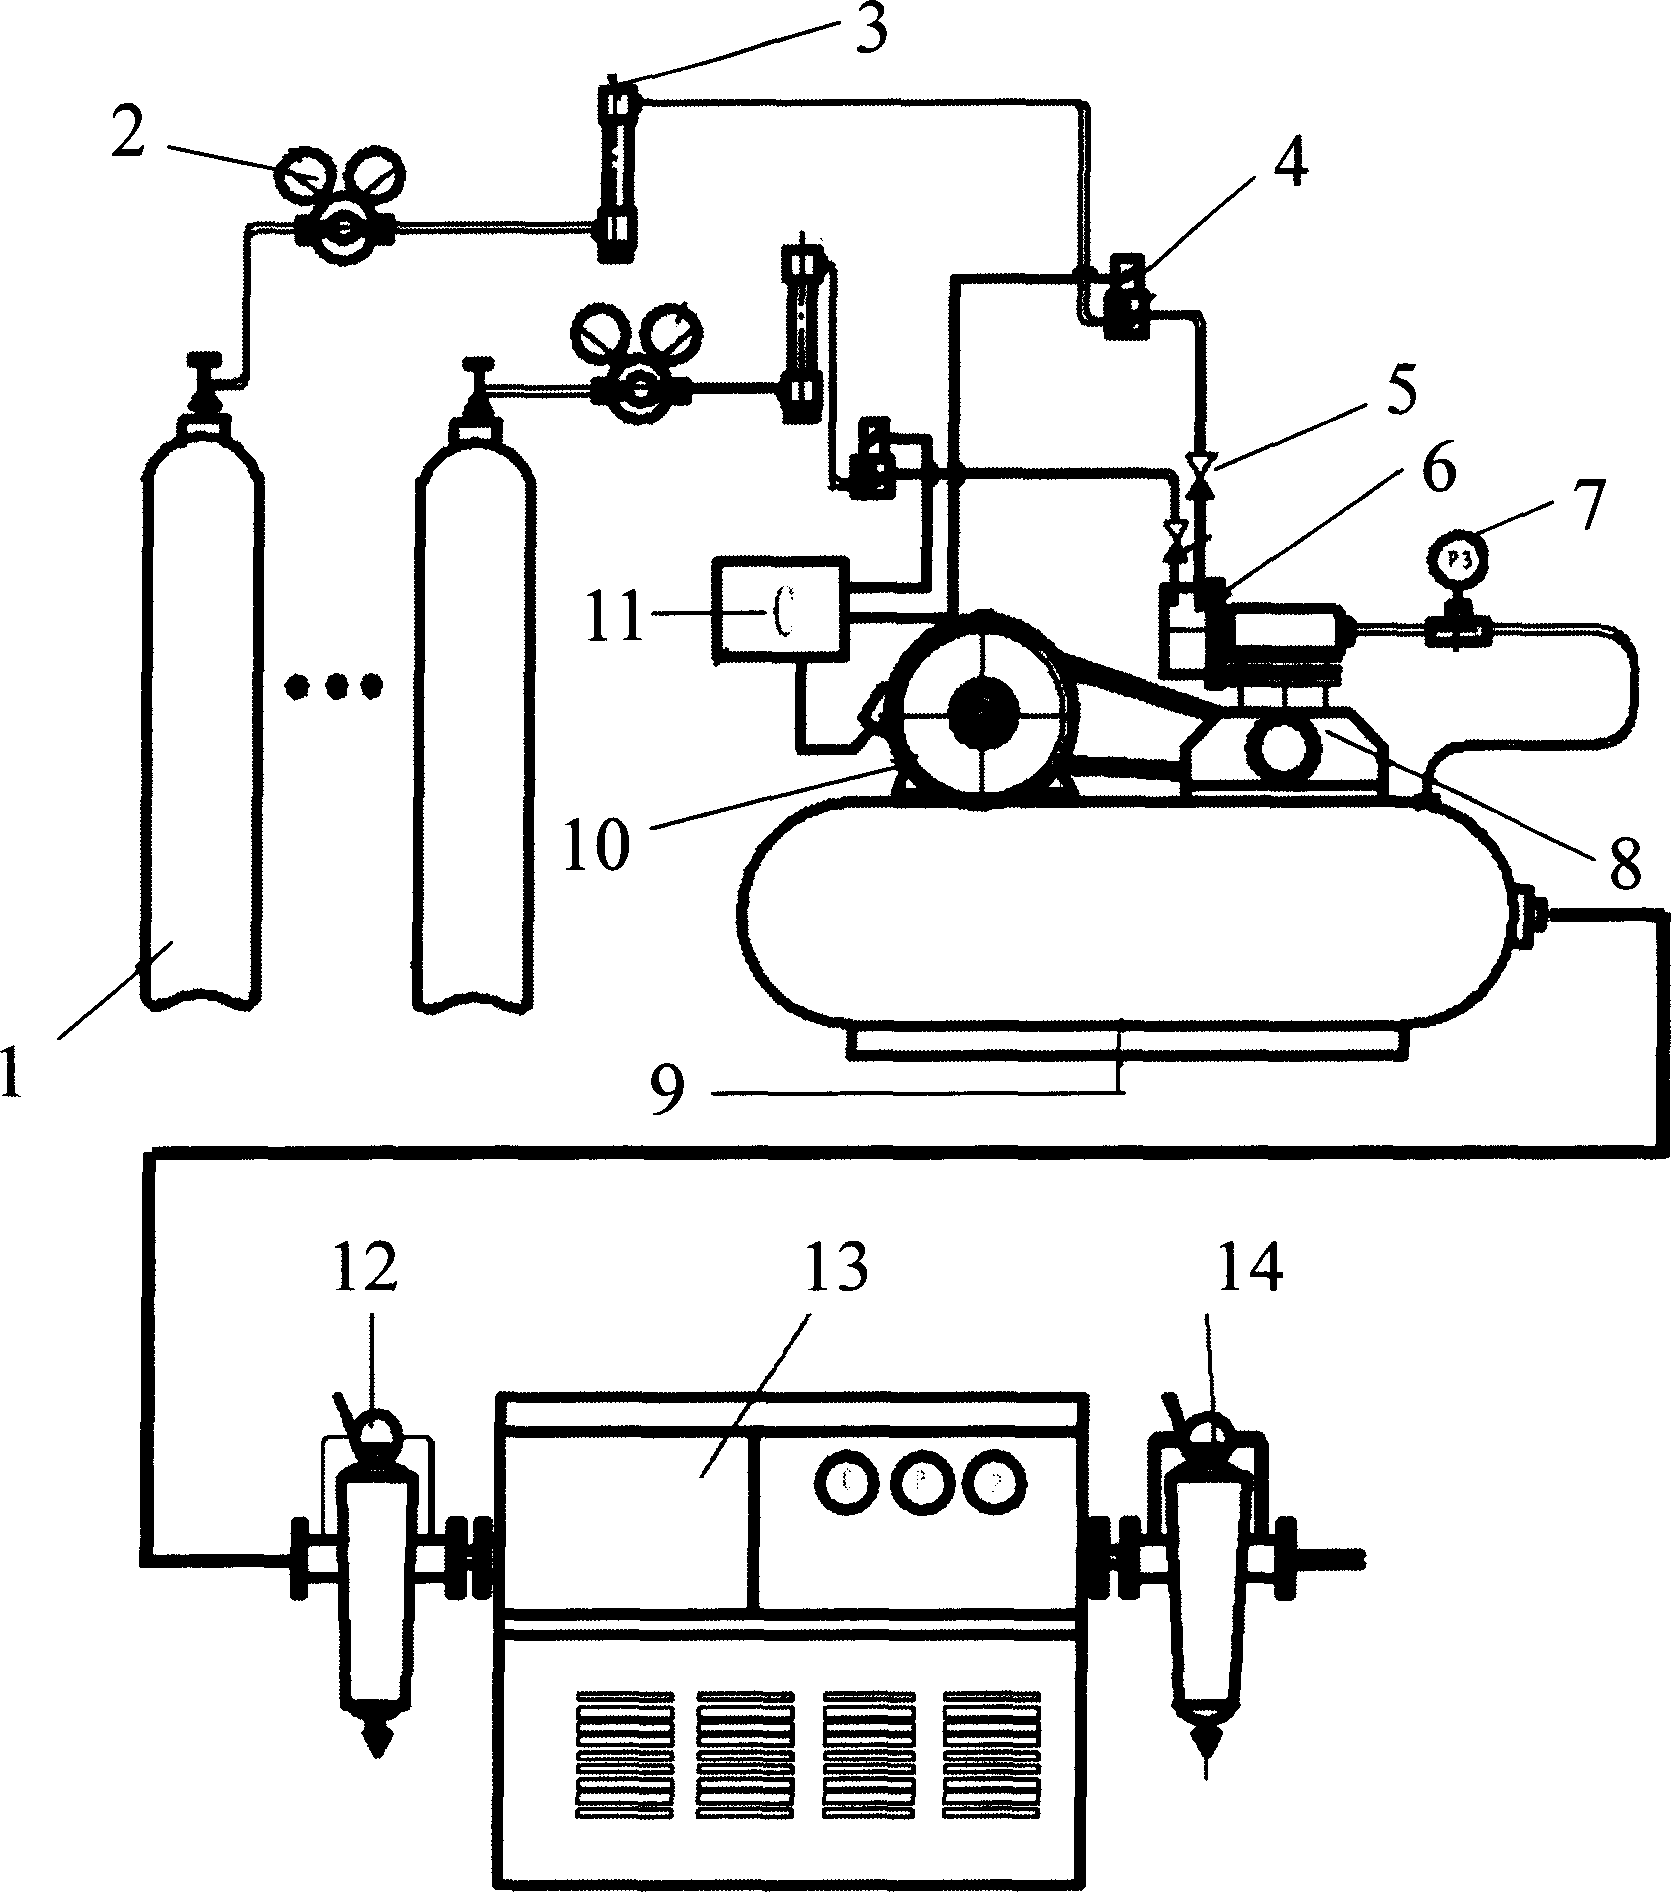 Polycomponent gas mixing device